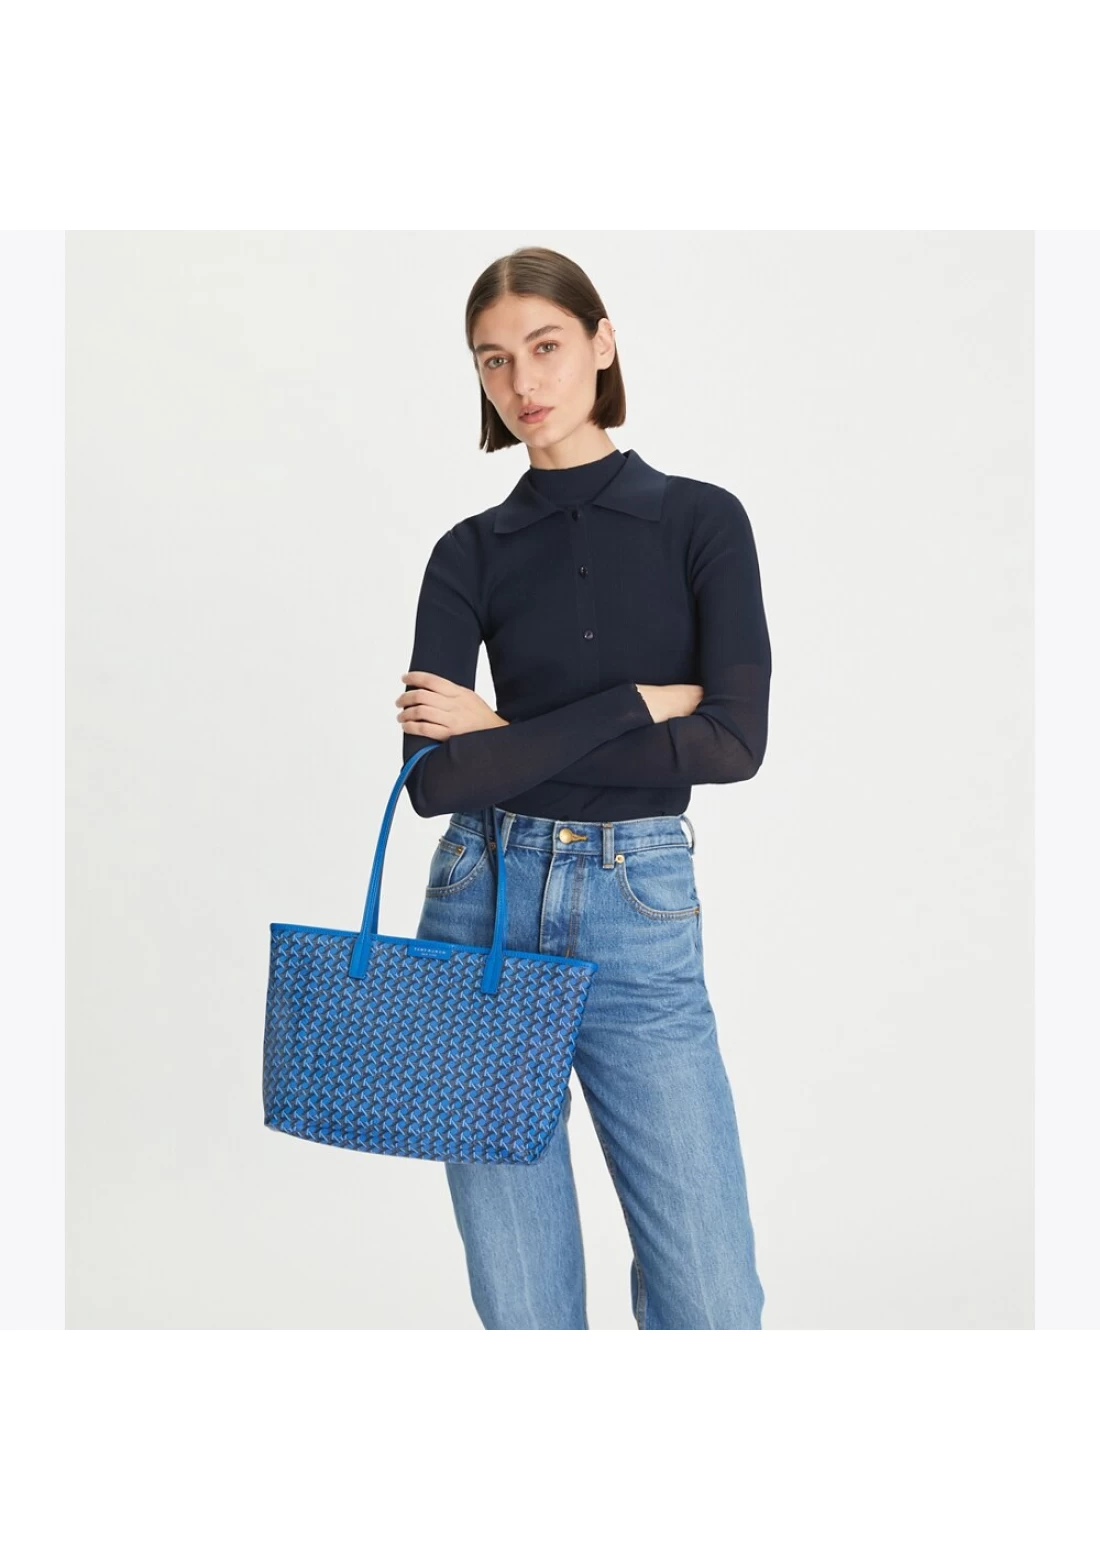 Tory Burch Ever Ready Tote